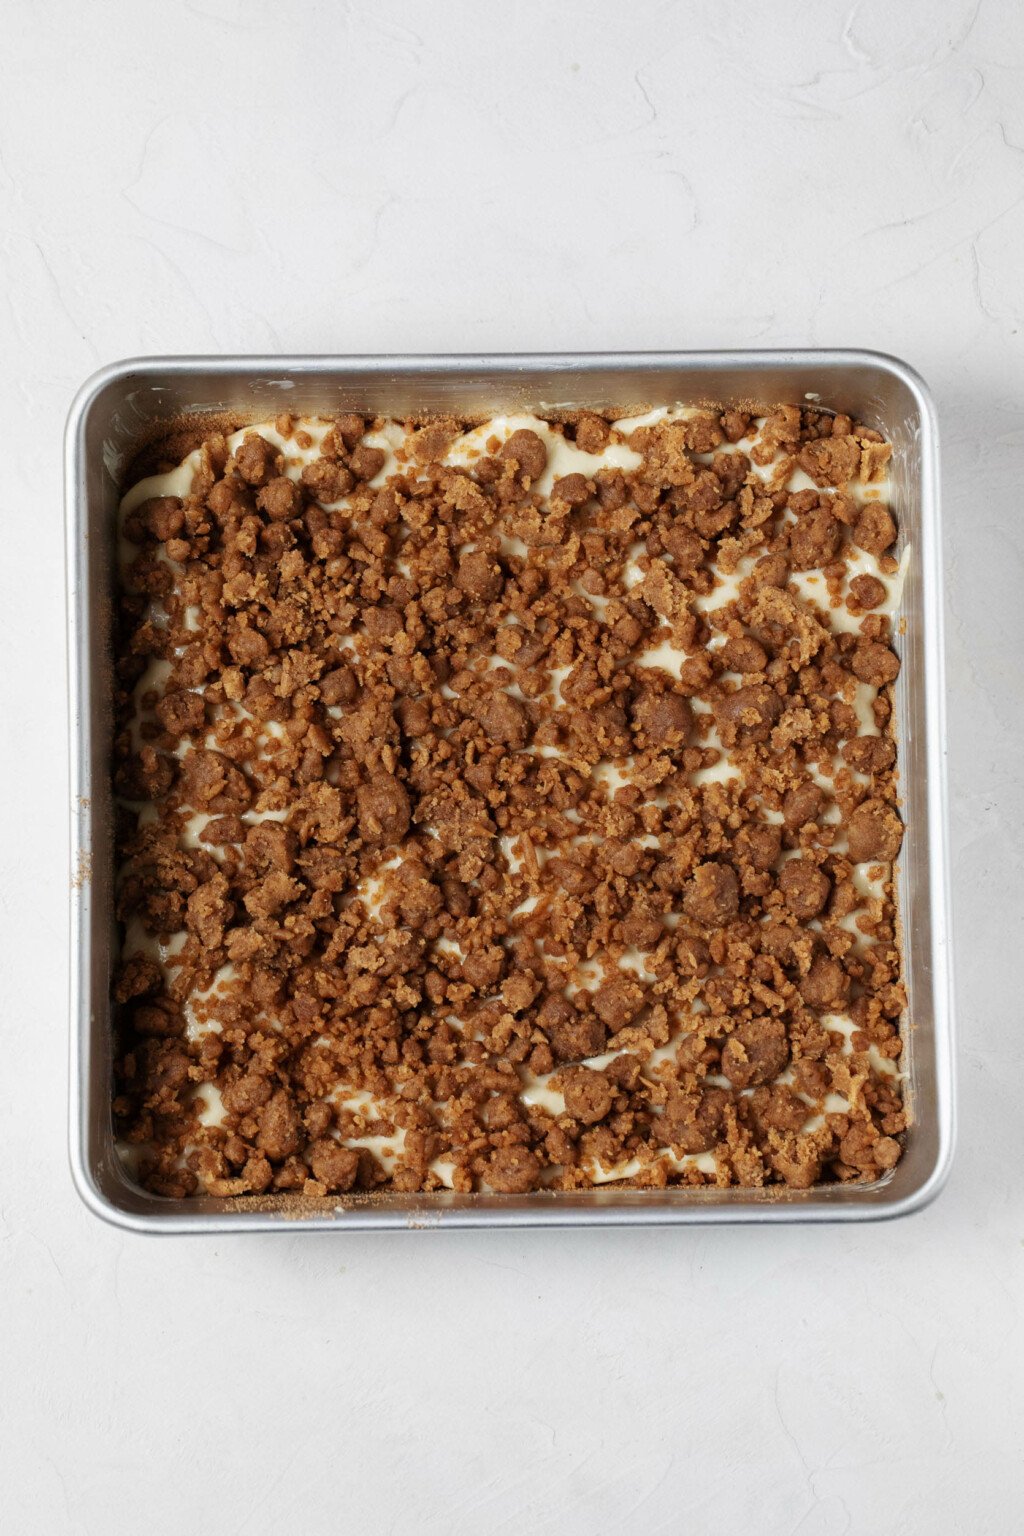 A square cake pan is pictured overhead. It contains a layer of cake batter topped with crumb-like streusel.